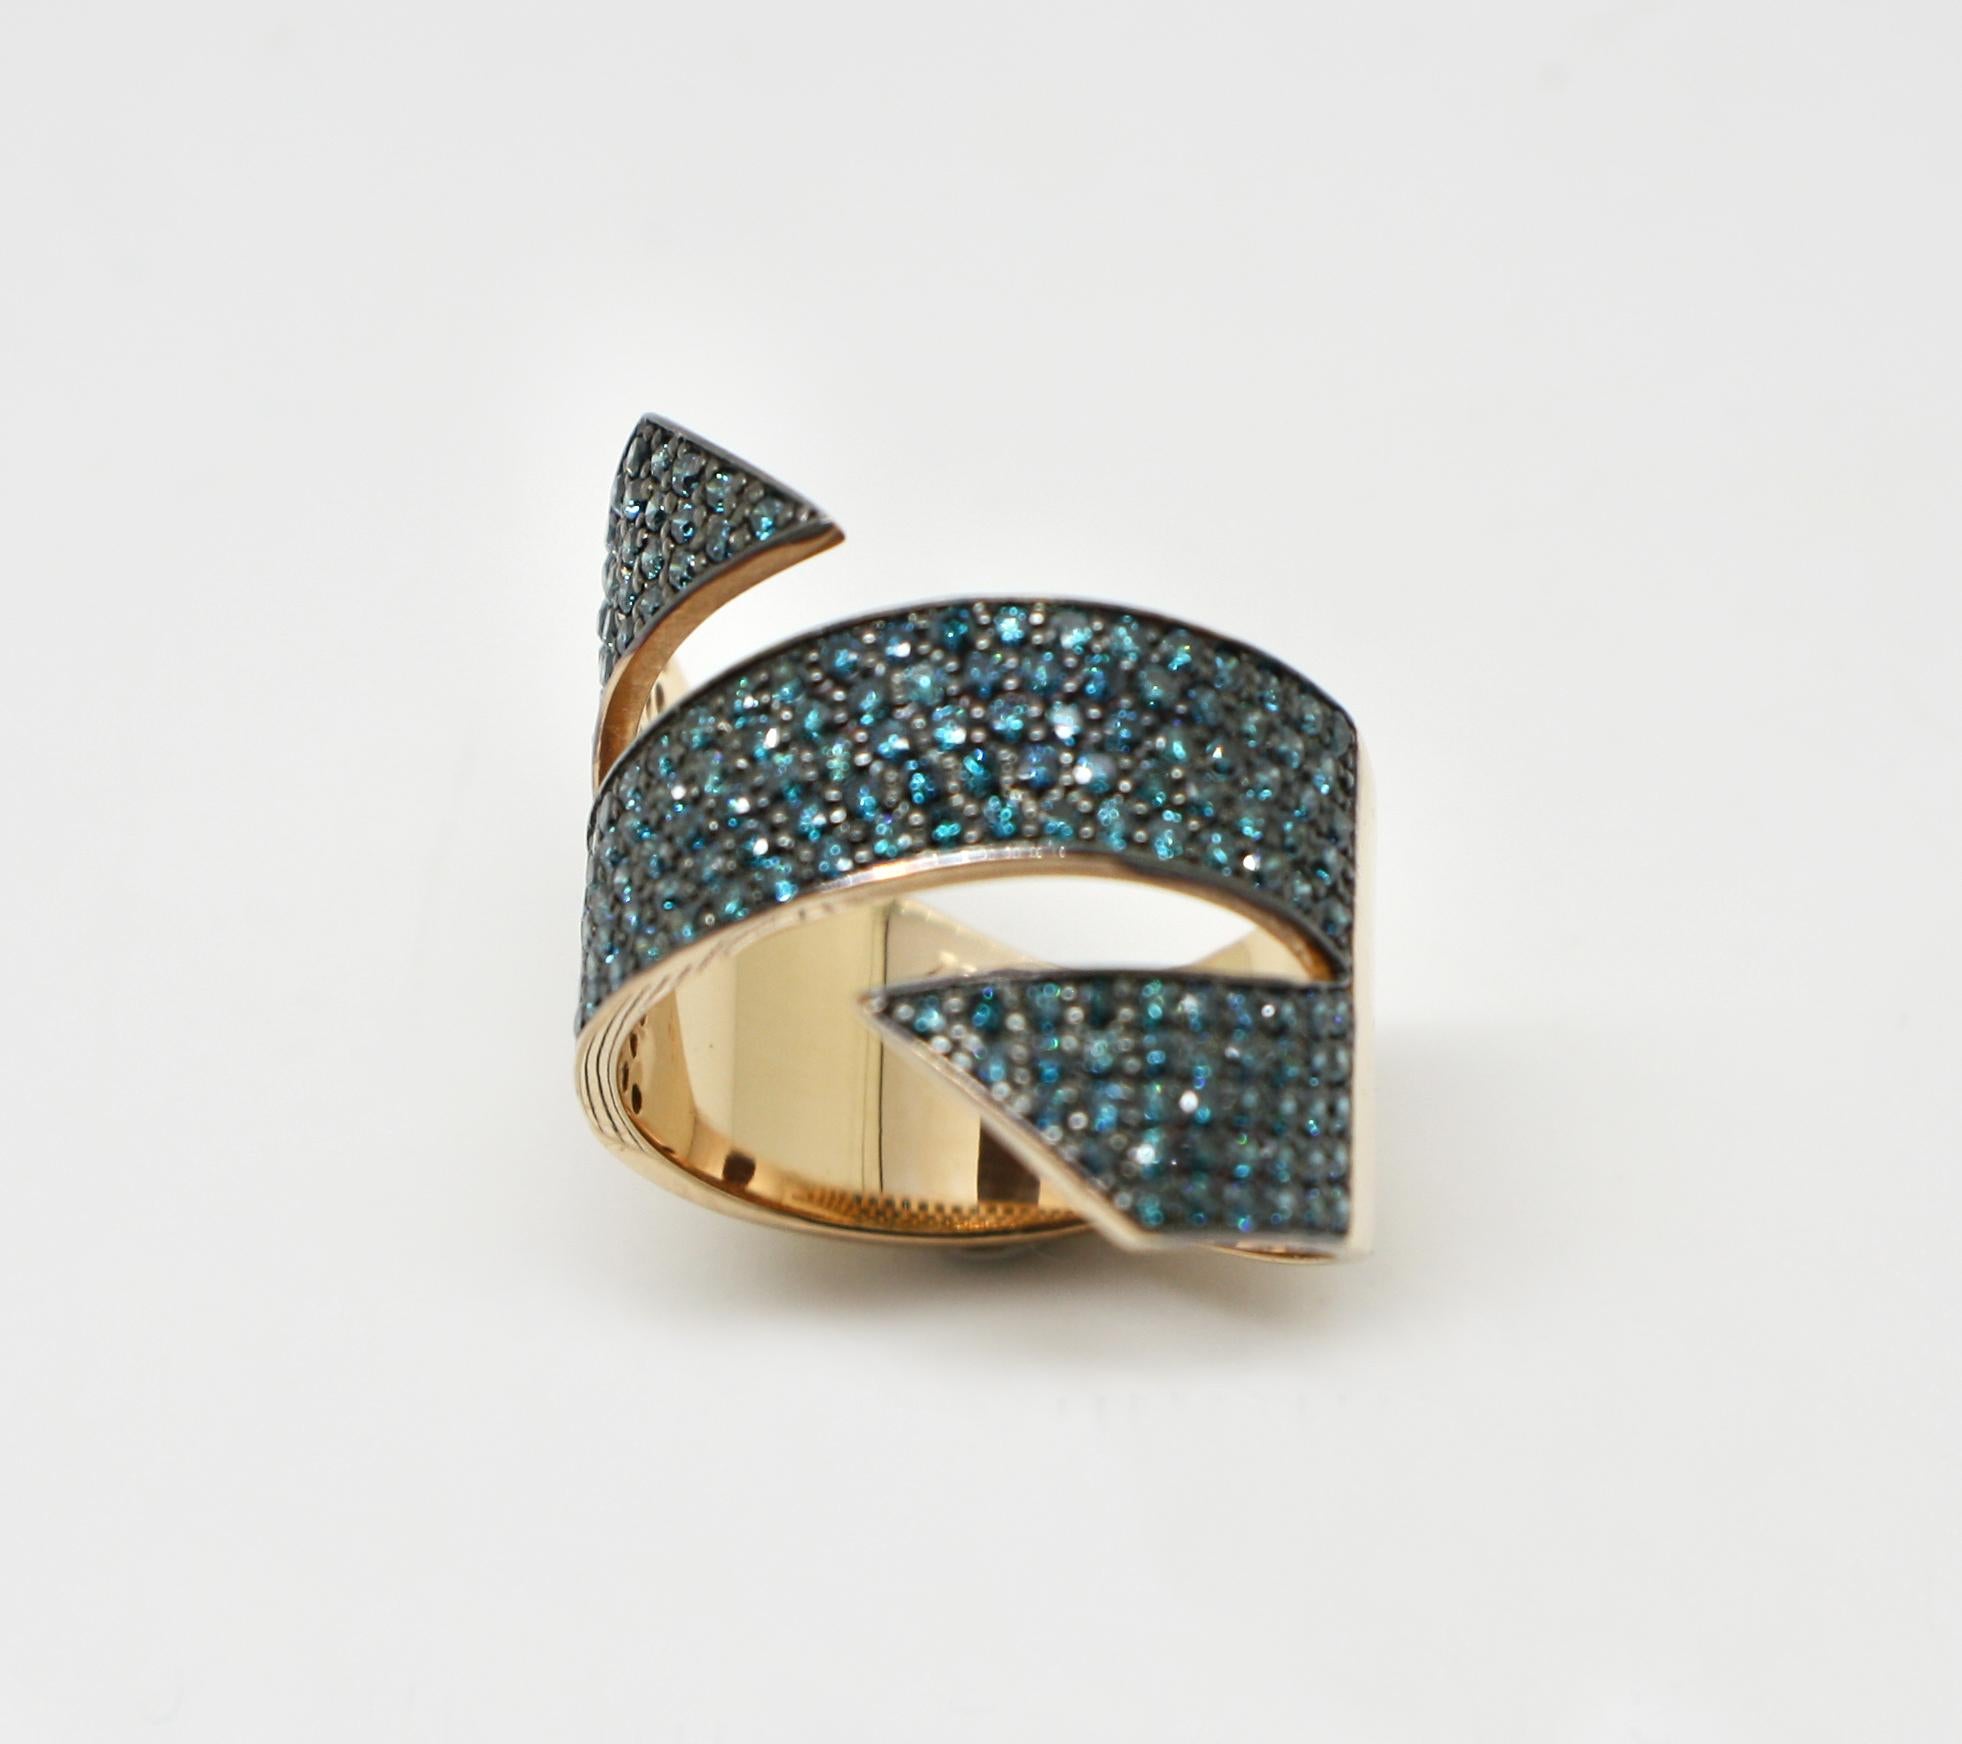 S.Georgios designer 18 Karat Rose Gold Wide Band Ring is all handmade in a unique two-tone look. The gorgeous wide band features brilliant-cut blue diamonds total weight of 1.52 Carat which is set in Black Rhodium prongs giving the ring a stunning